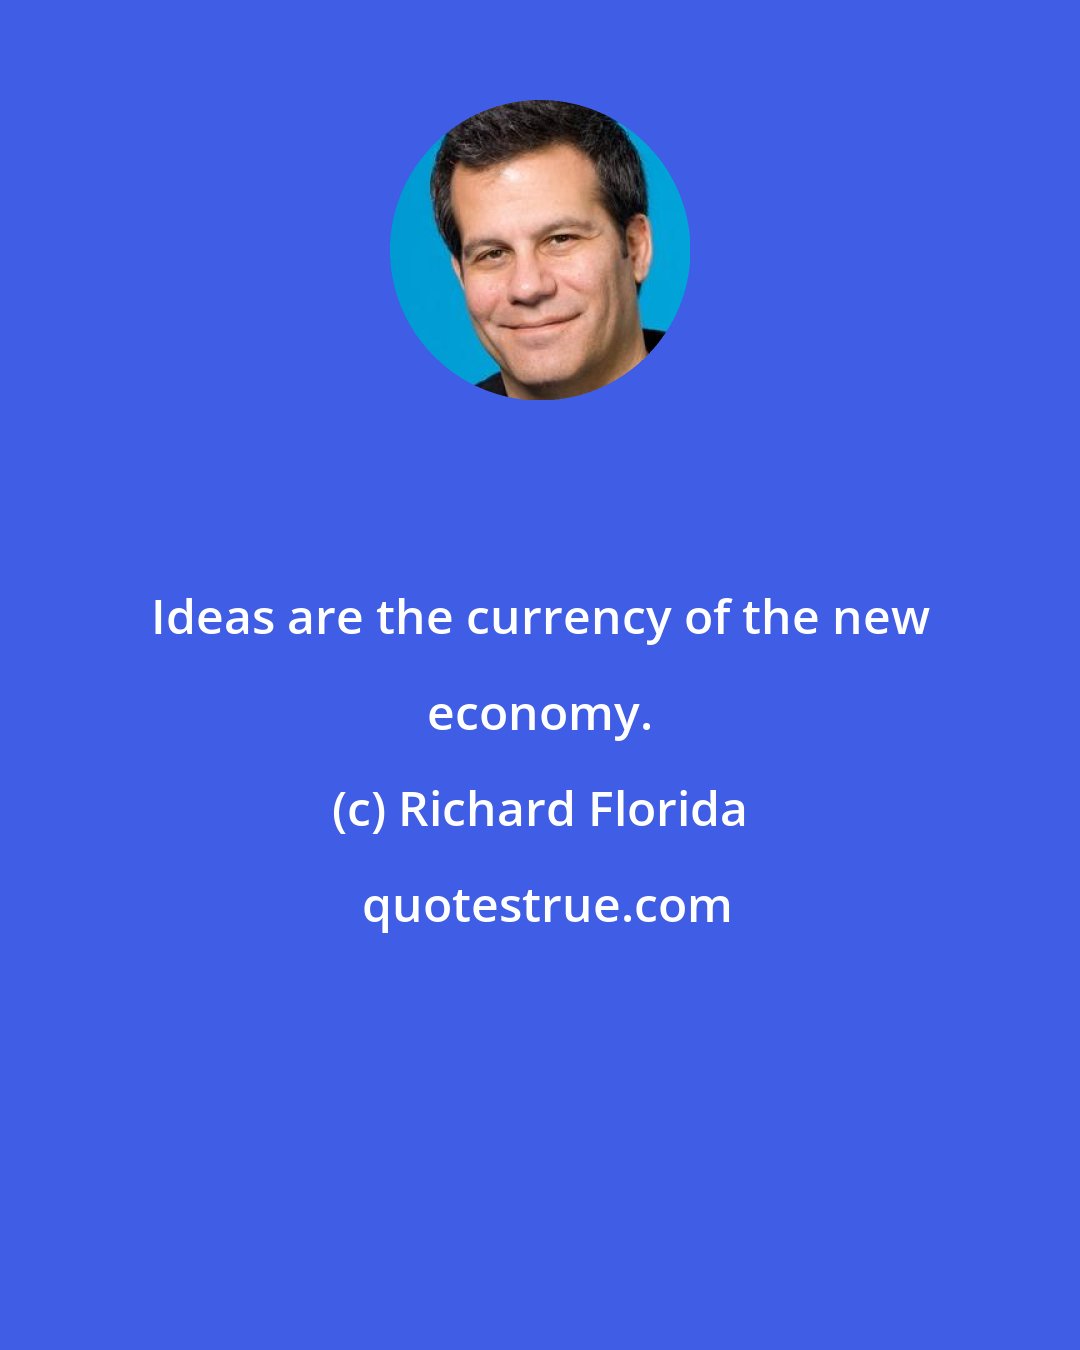 Richard Florida: Ideas are the currency of the new economy.